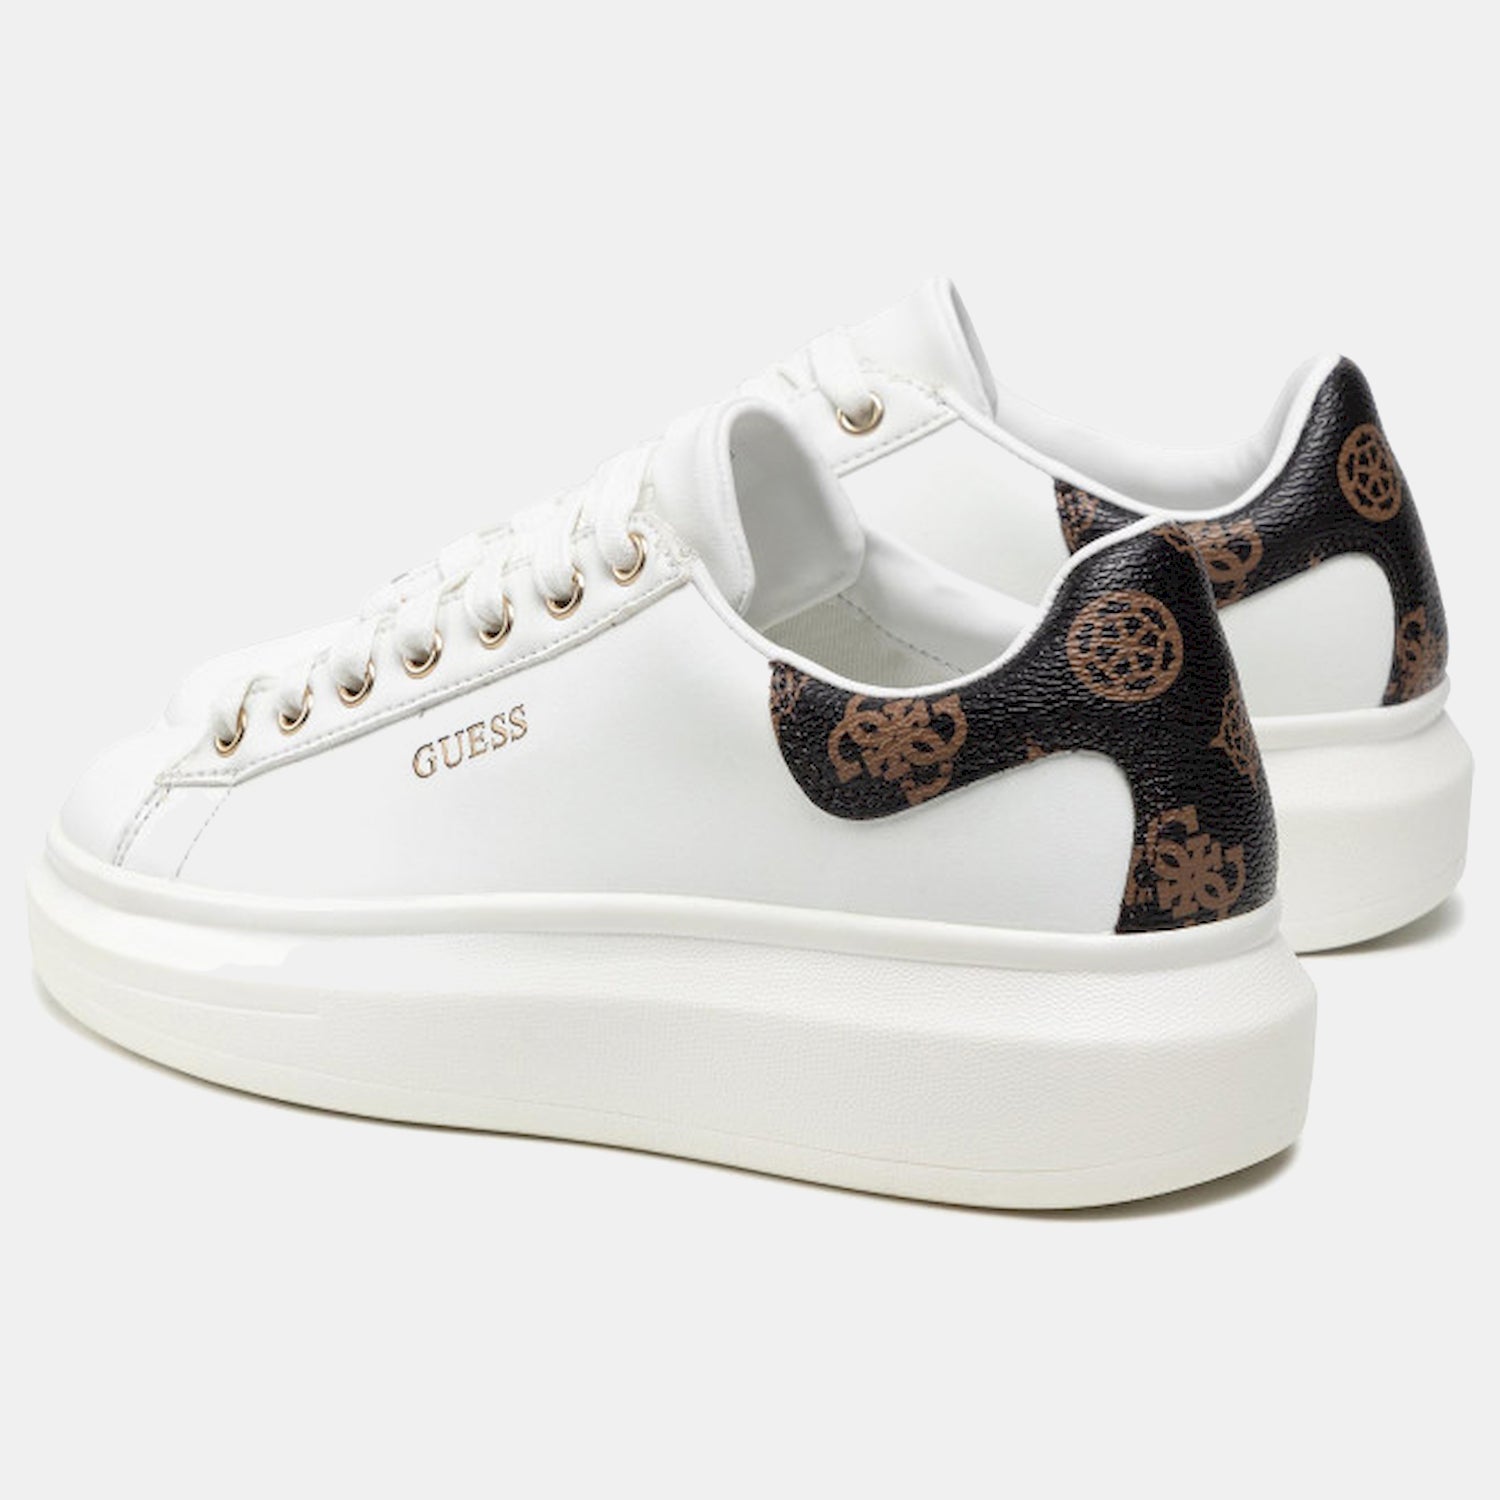 Guess Sapatilhas Sneakers Shoes Fl7rnofal12 Whi Brown Branco Castanho_shot2